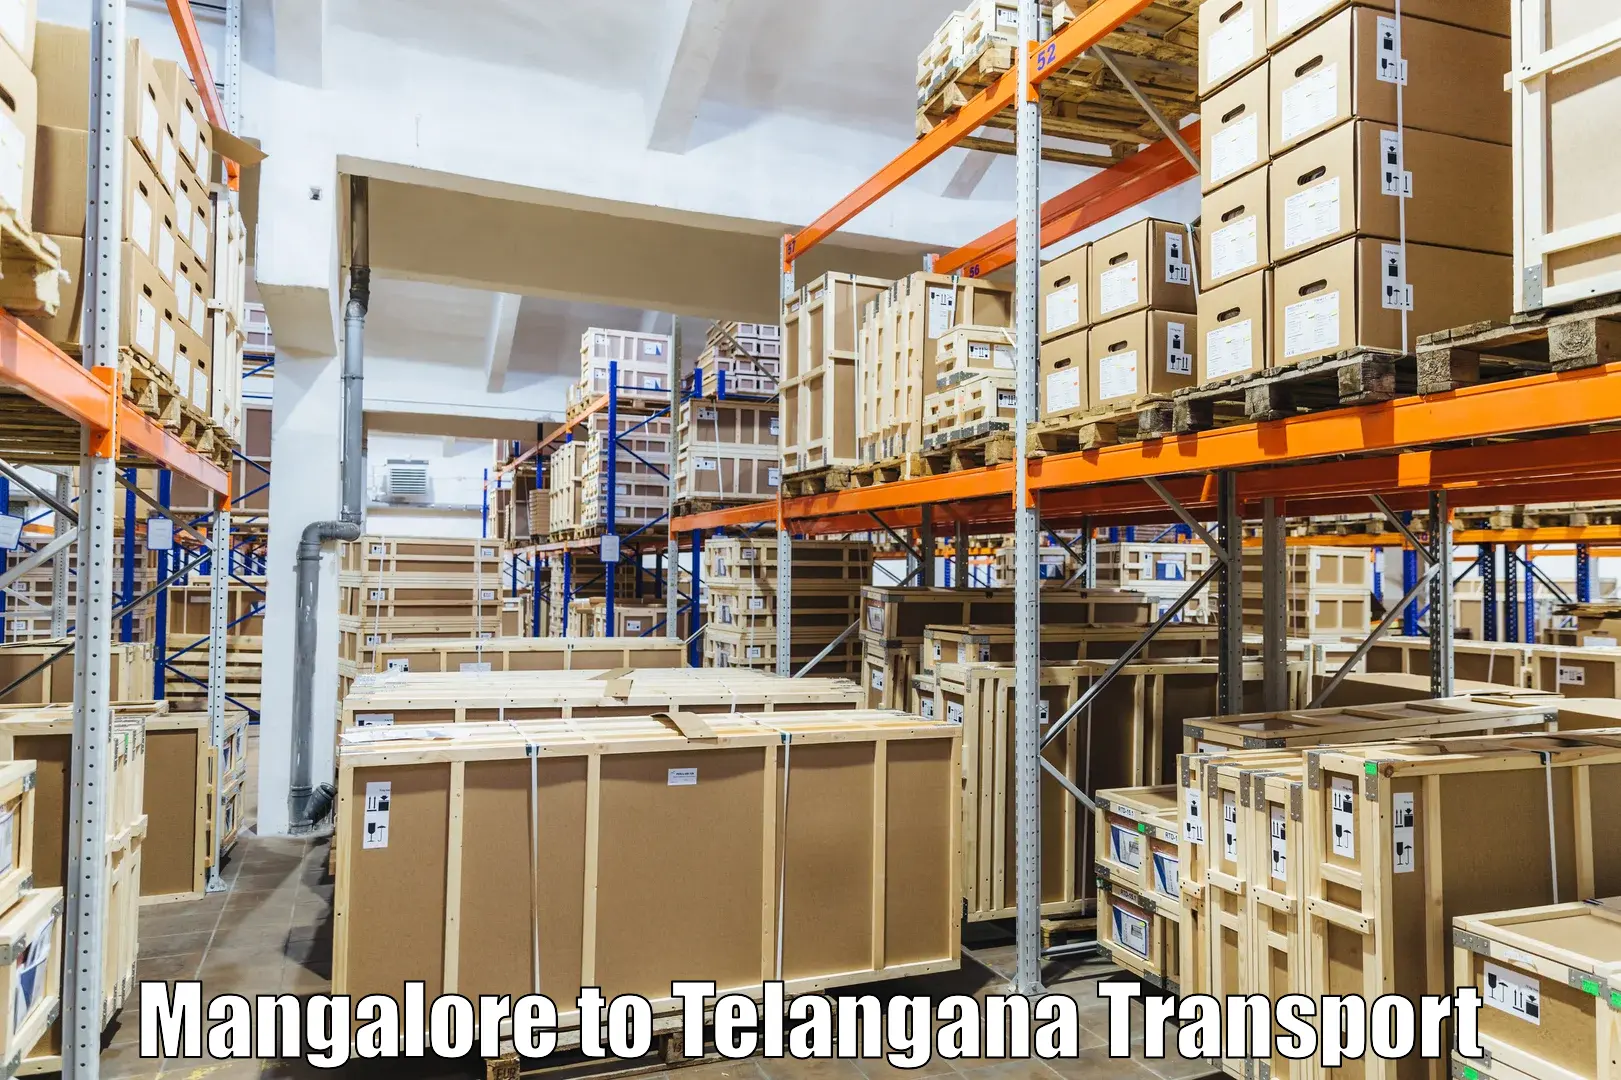 Transport shared services Mangalore to Hyderabad